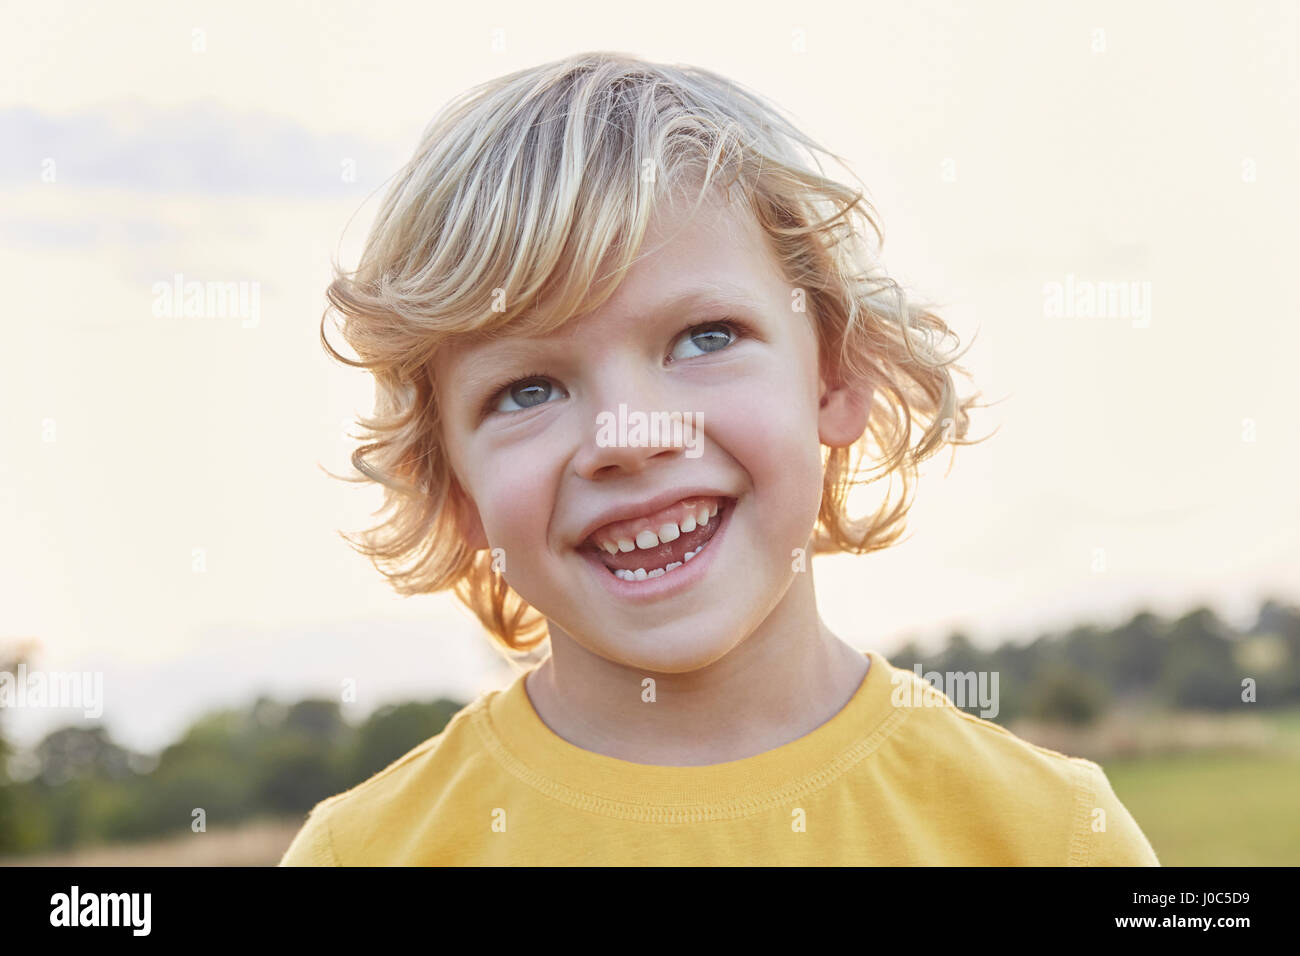 Cute Blond Haired Blue Eyed Stock Photos Cute Blond Haired Blue